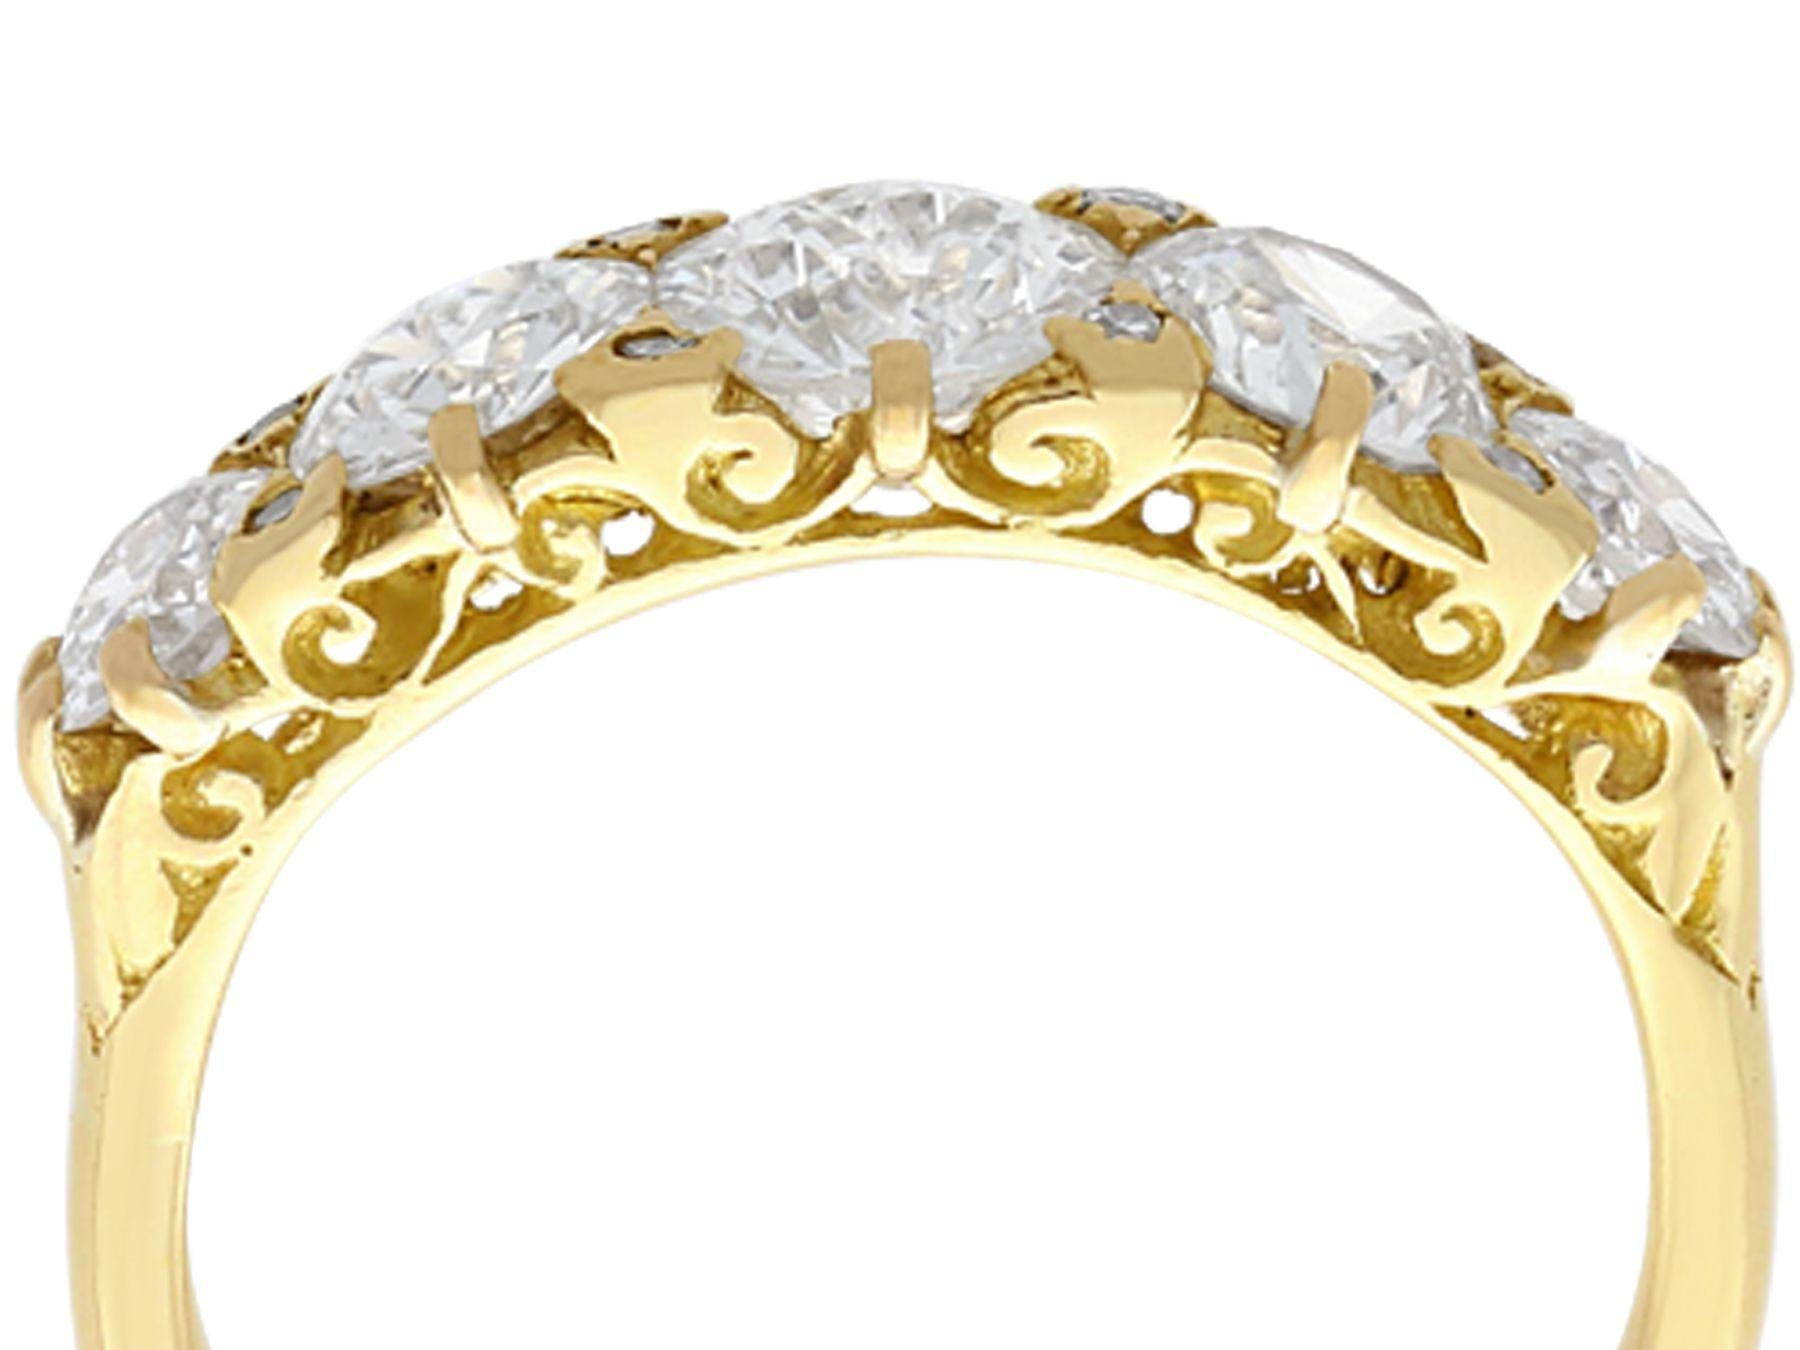 A stunning, fine and impressive antique 3.31 carat diamond and 18 karat yellow gold five stone ring; part of our antique jewelry and estate jewelry collections.

This stunning antique five stone diamond ring has been crafted in 18 karat yellow